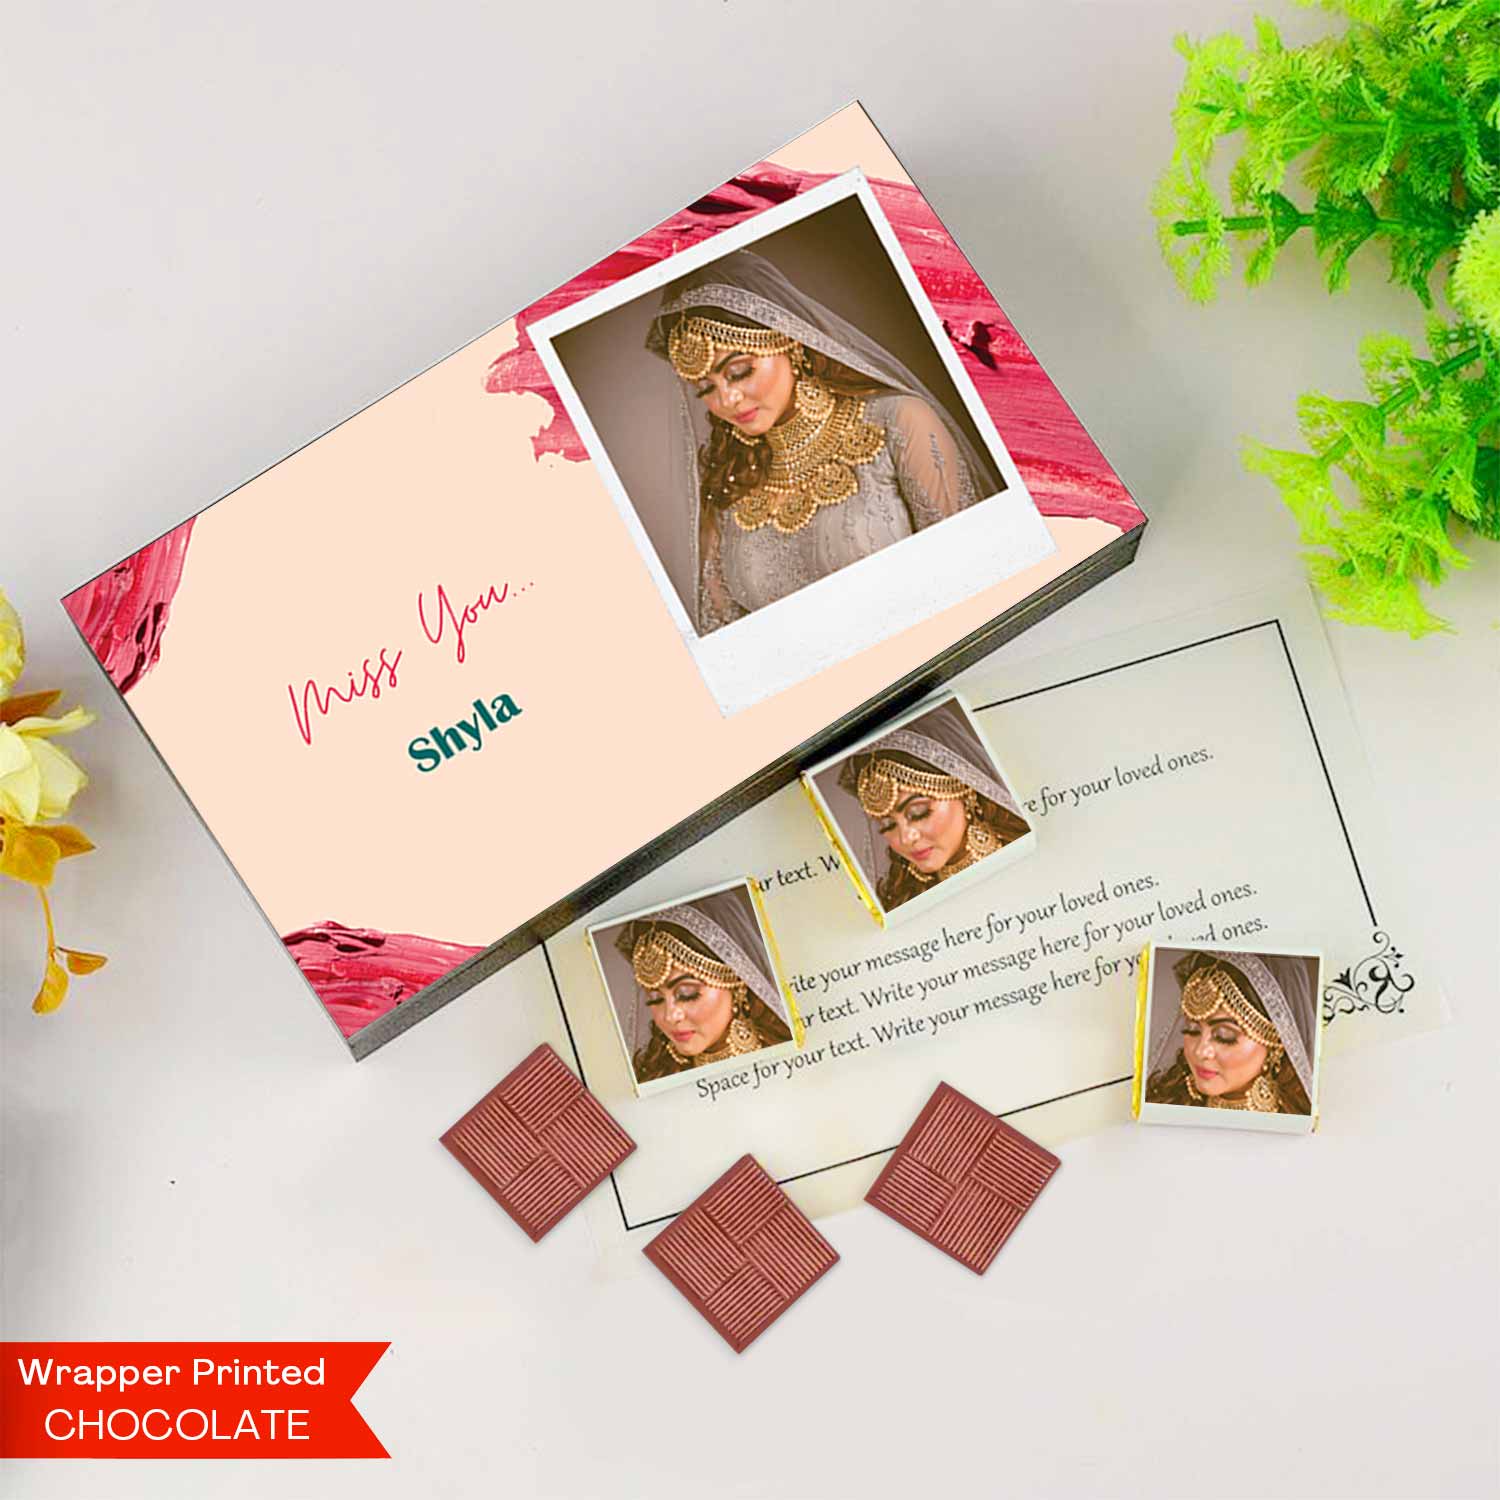 Miss you gifts I  Image printed chocolate box I  Delicious chocolates I  Free shipping across India I  Elegant wooden packaging